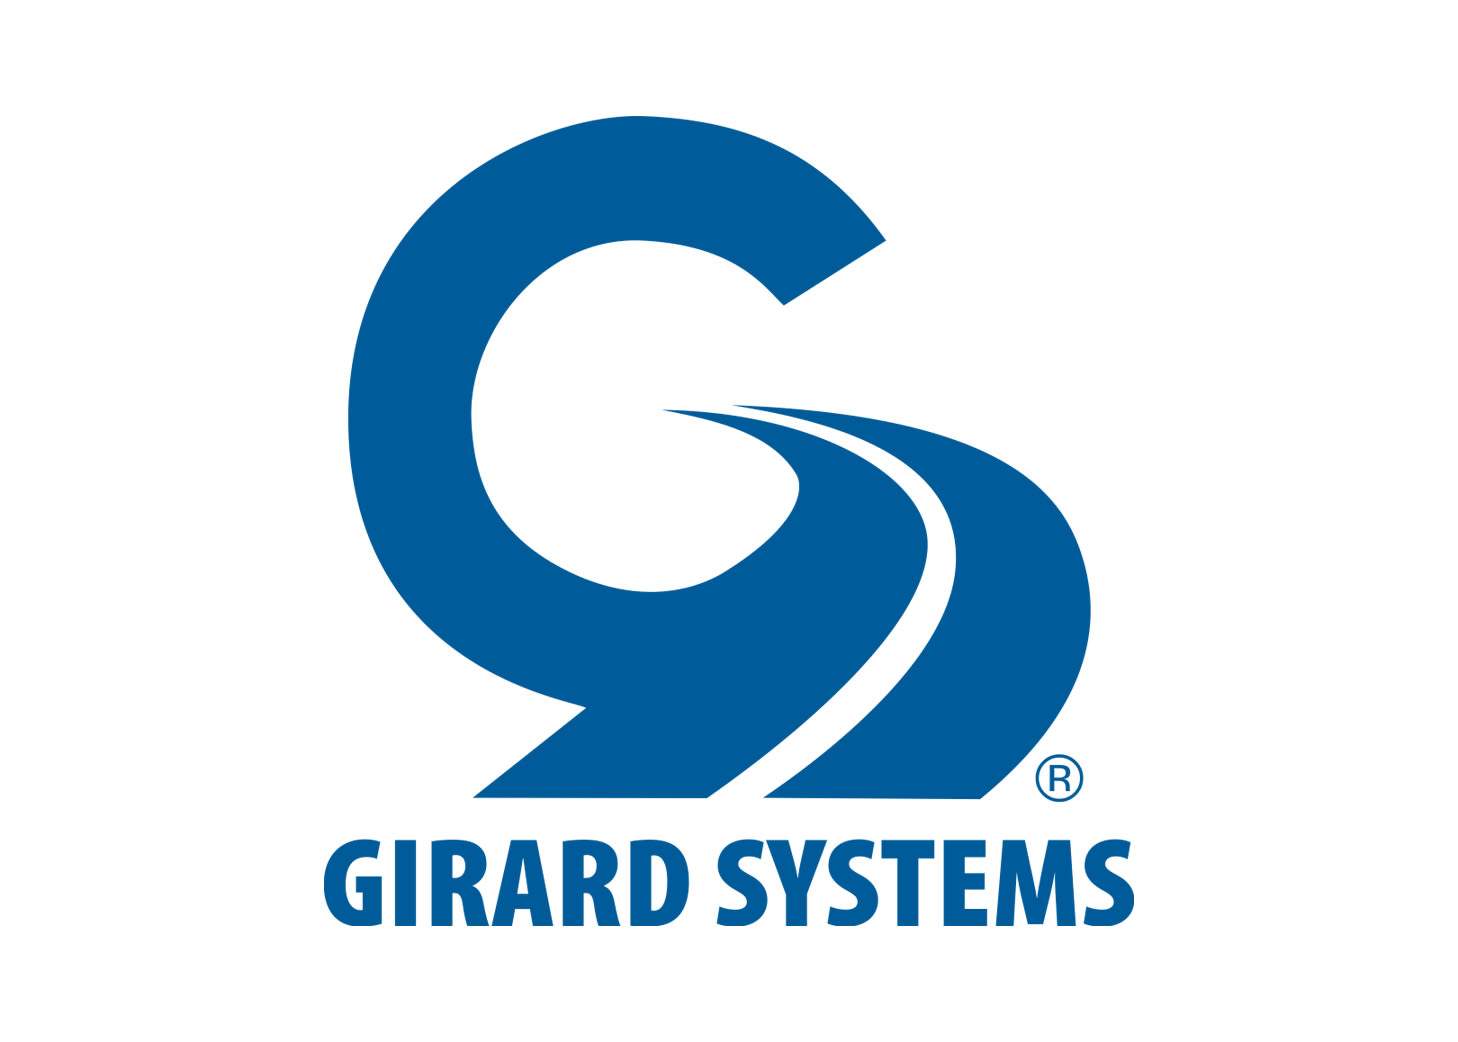 Acquisition of Girard